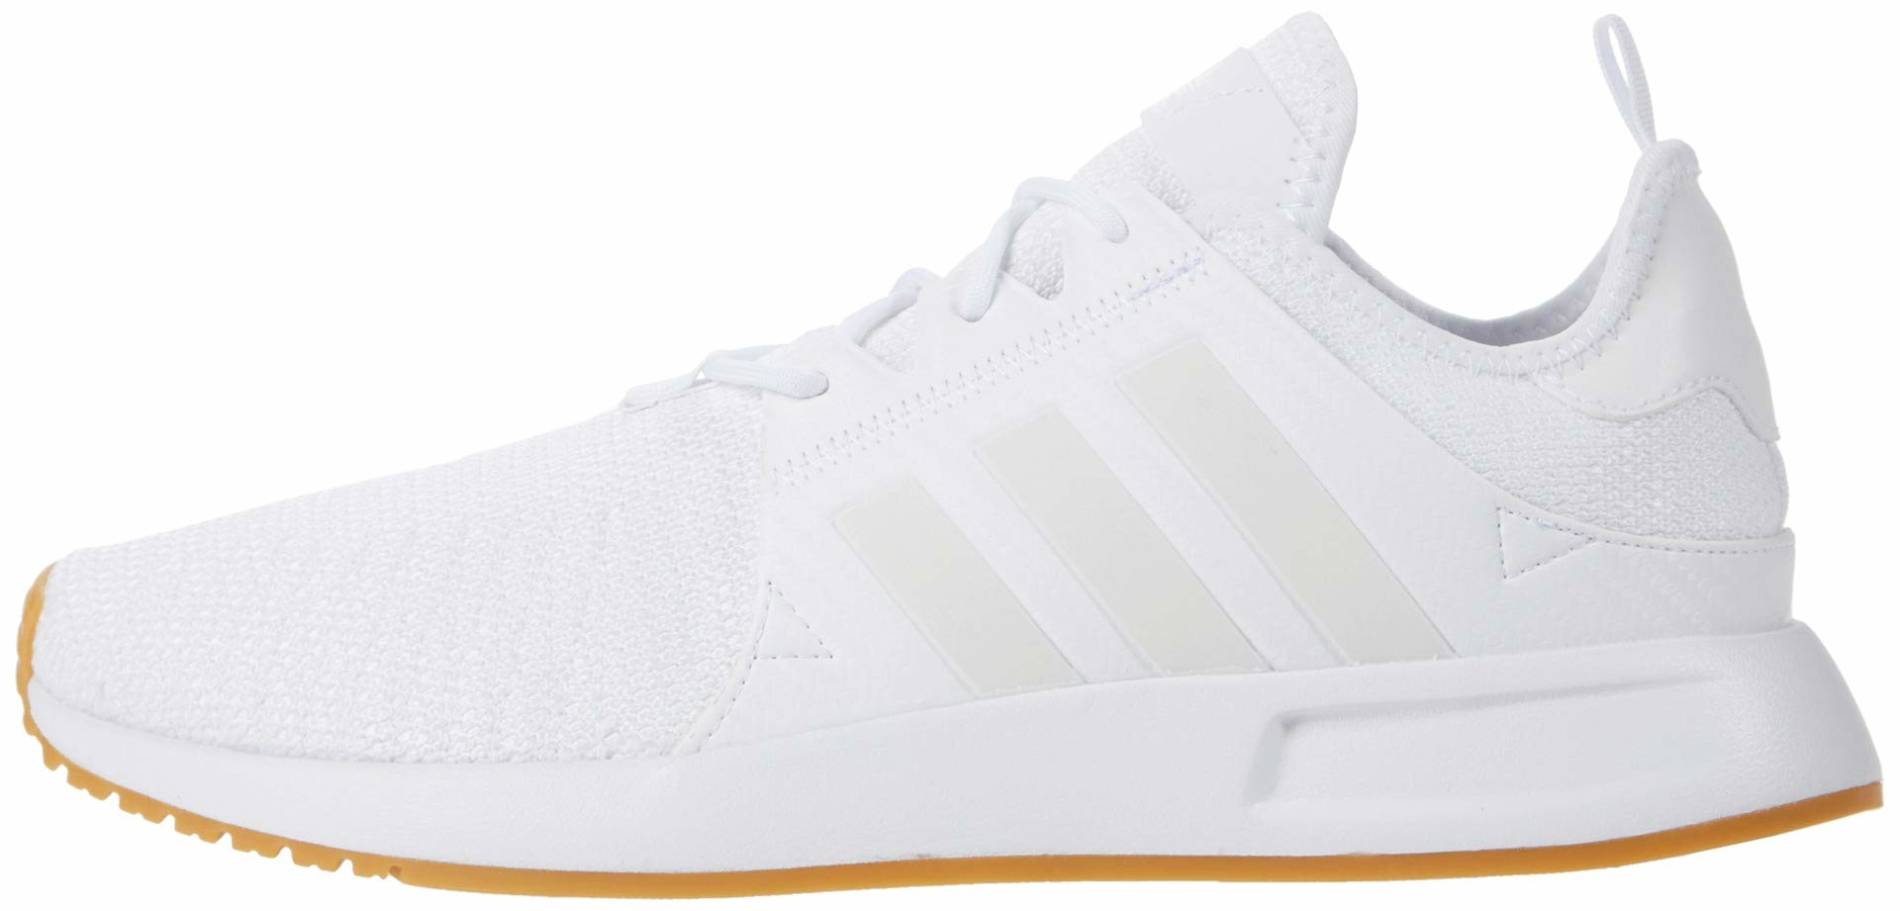 200+ White Adidas sneakers: Save up to 51%